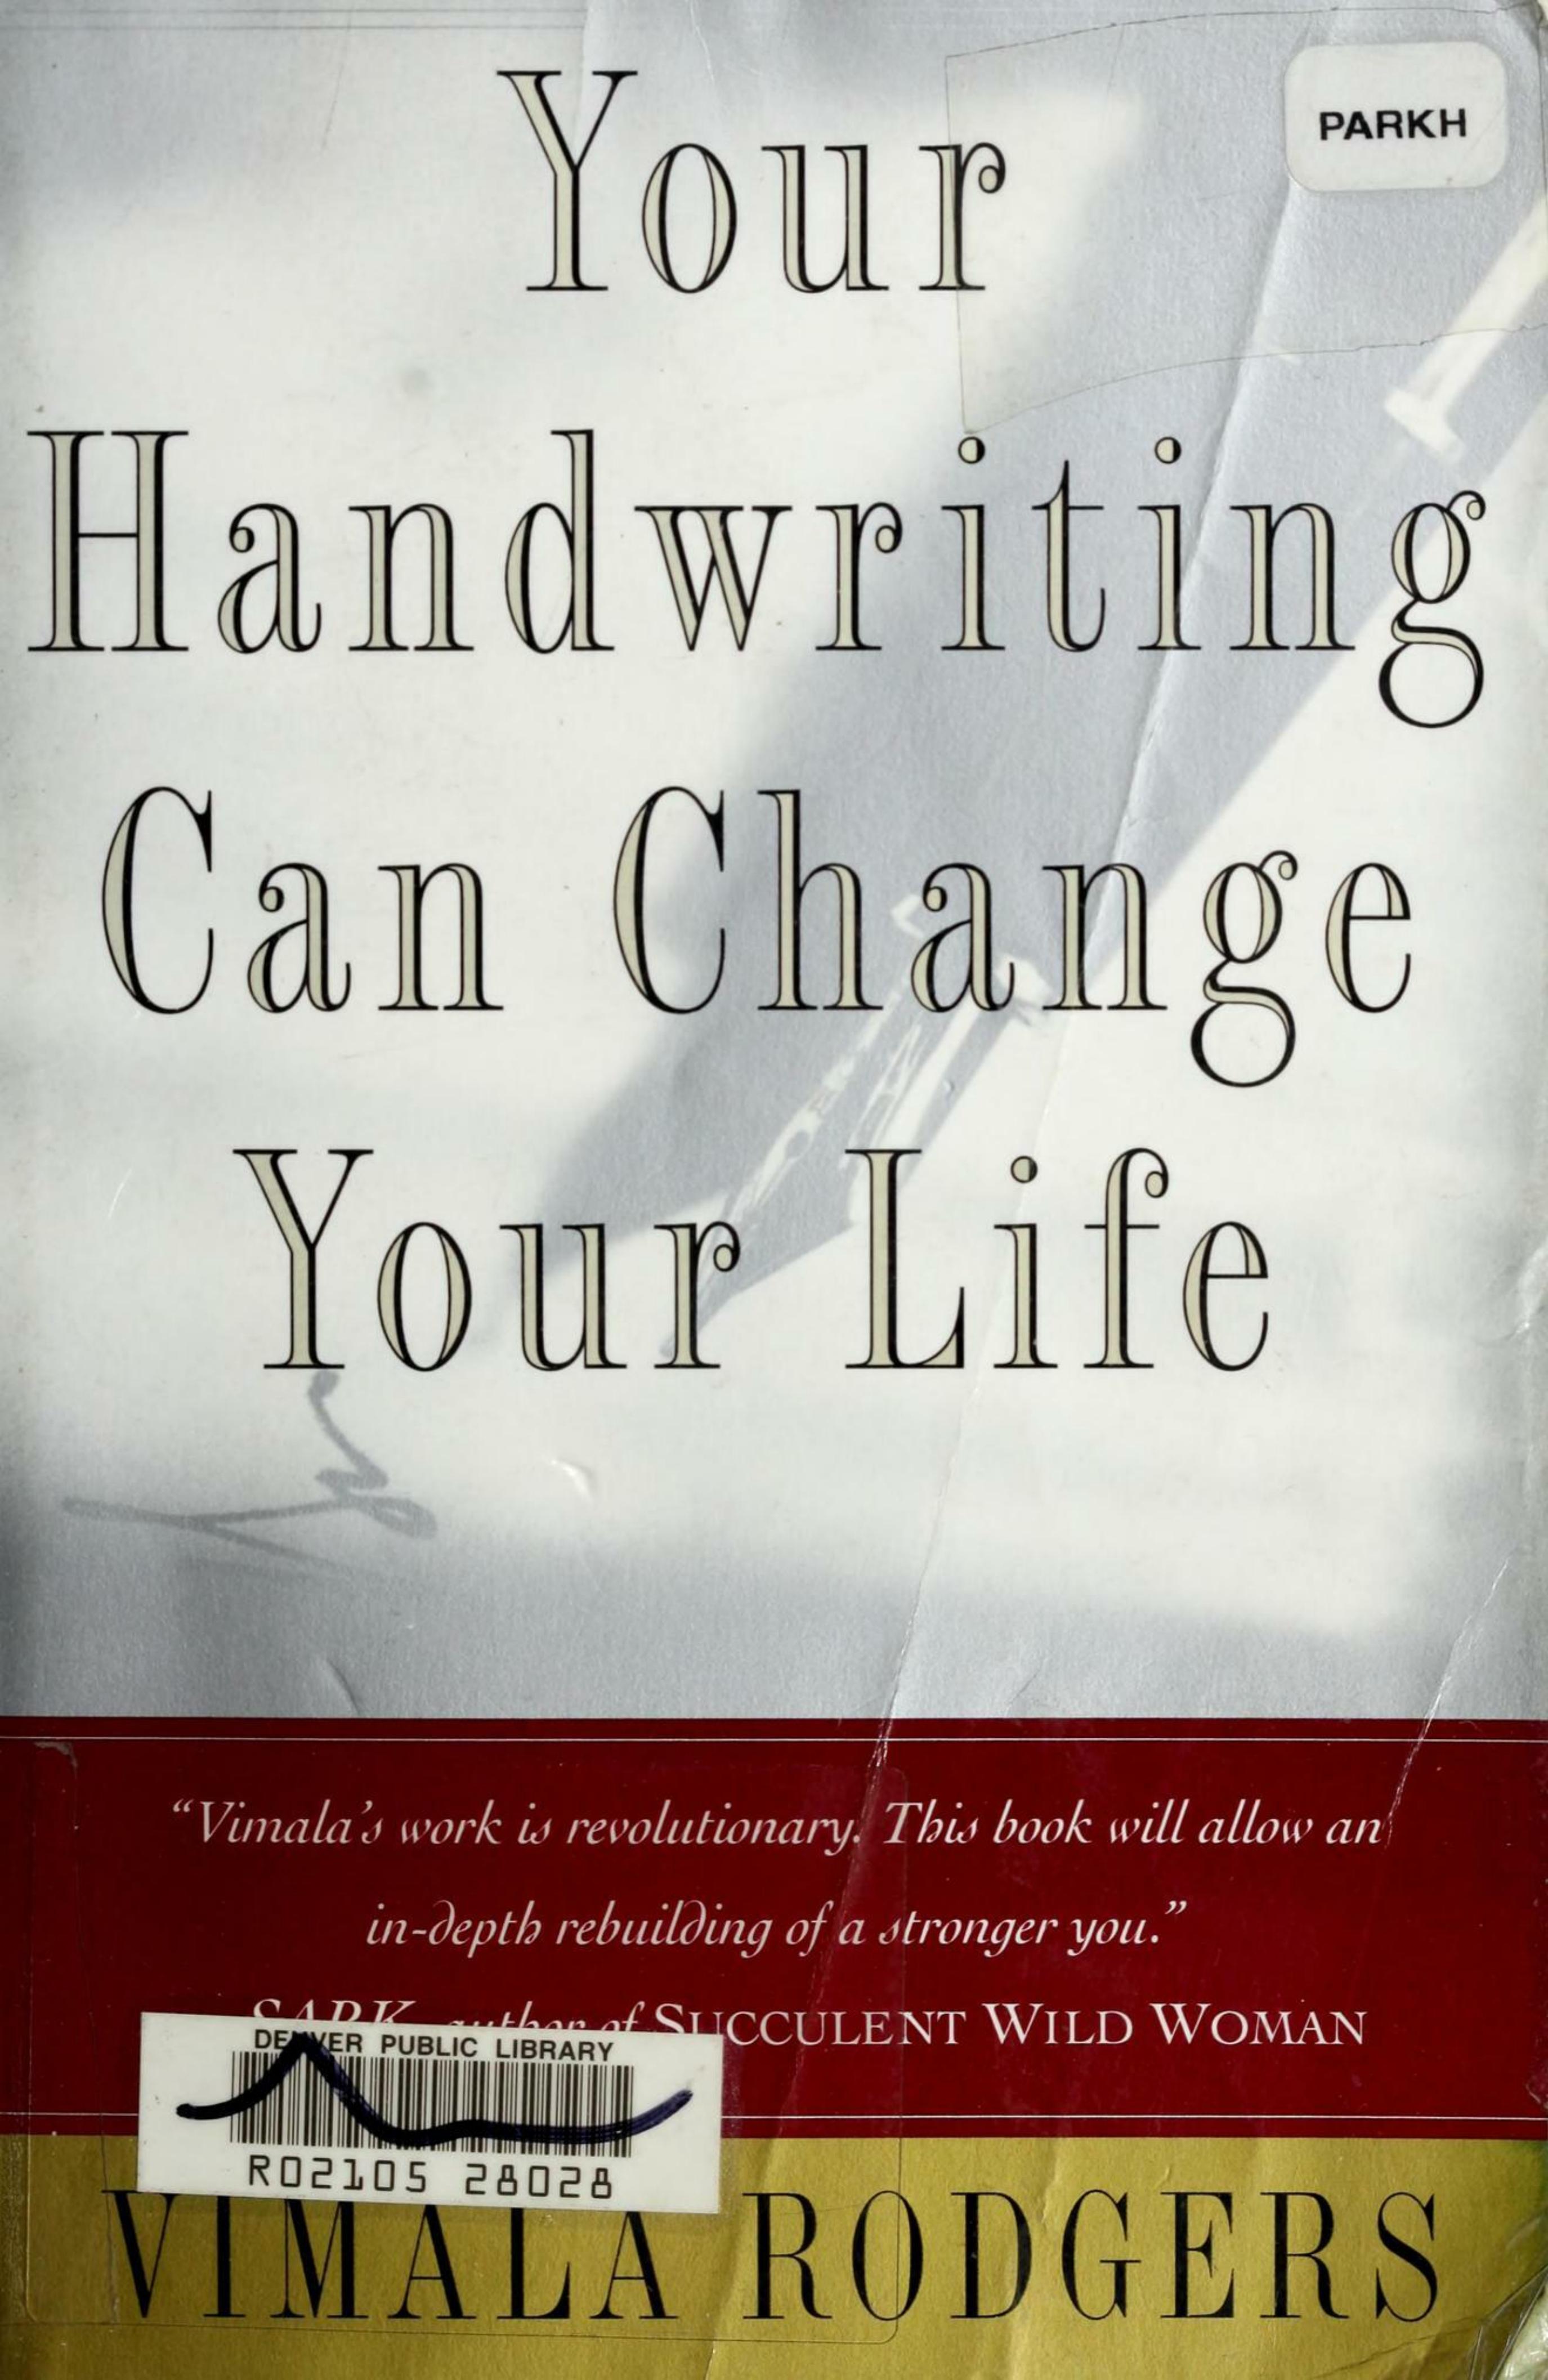 Your Handwriting Can Change Your Life by Vimala Rodgers